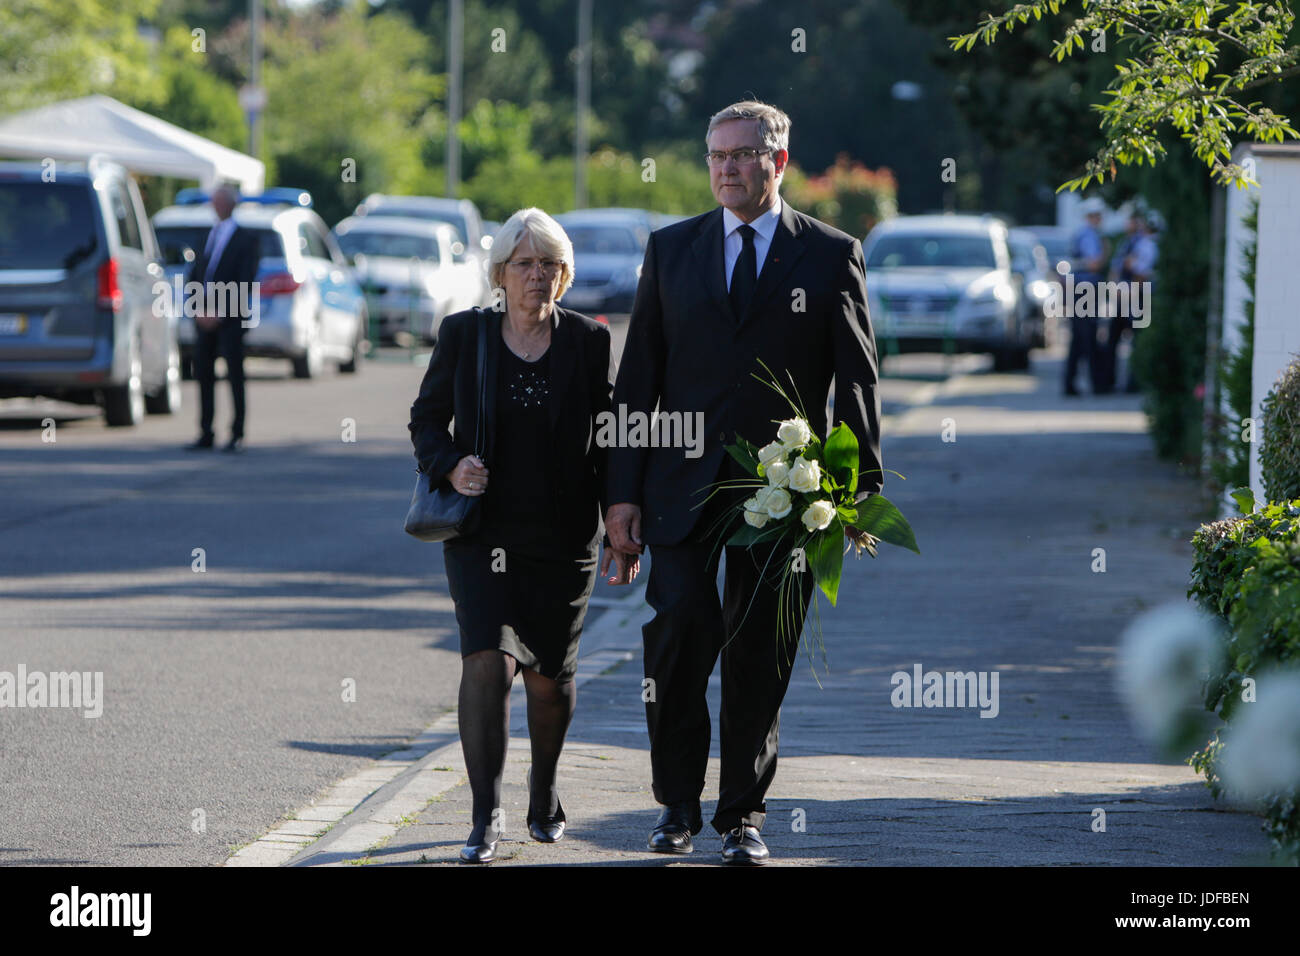 Oggersheim, Germany. 19th June, 2017. Former German Defence Minister Franz Josef Jung and his wife Gabriella arrive at the former residence of Helmut Kohl. Long term political companion Theo Waigel, who served as German Minister of Finance under Helmut Kohl, came to pay his respects to his widow 3 days after the death of the former German Chancellor in his home in Oggersheim. Credit: Michael Debets/Pacific Press/Alamy Live News Stock Photo